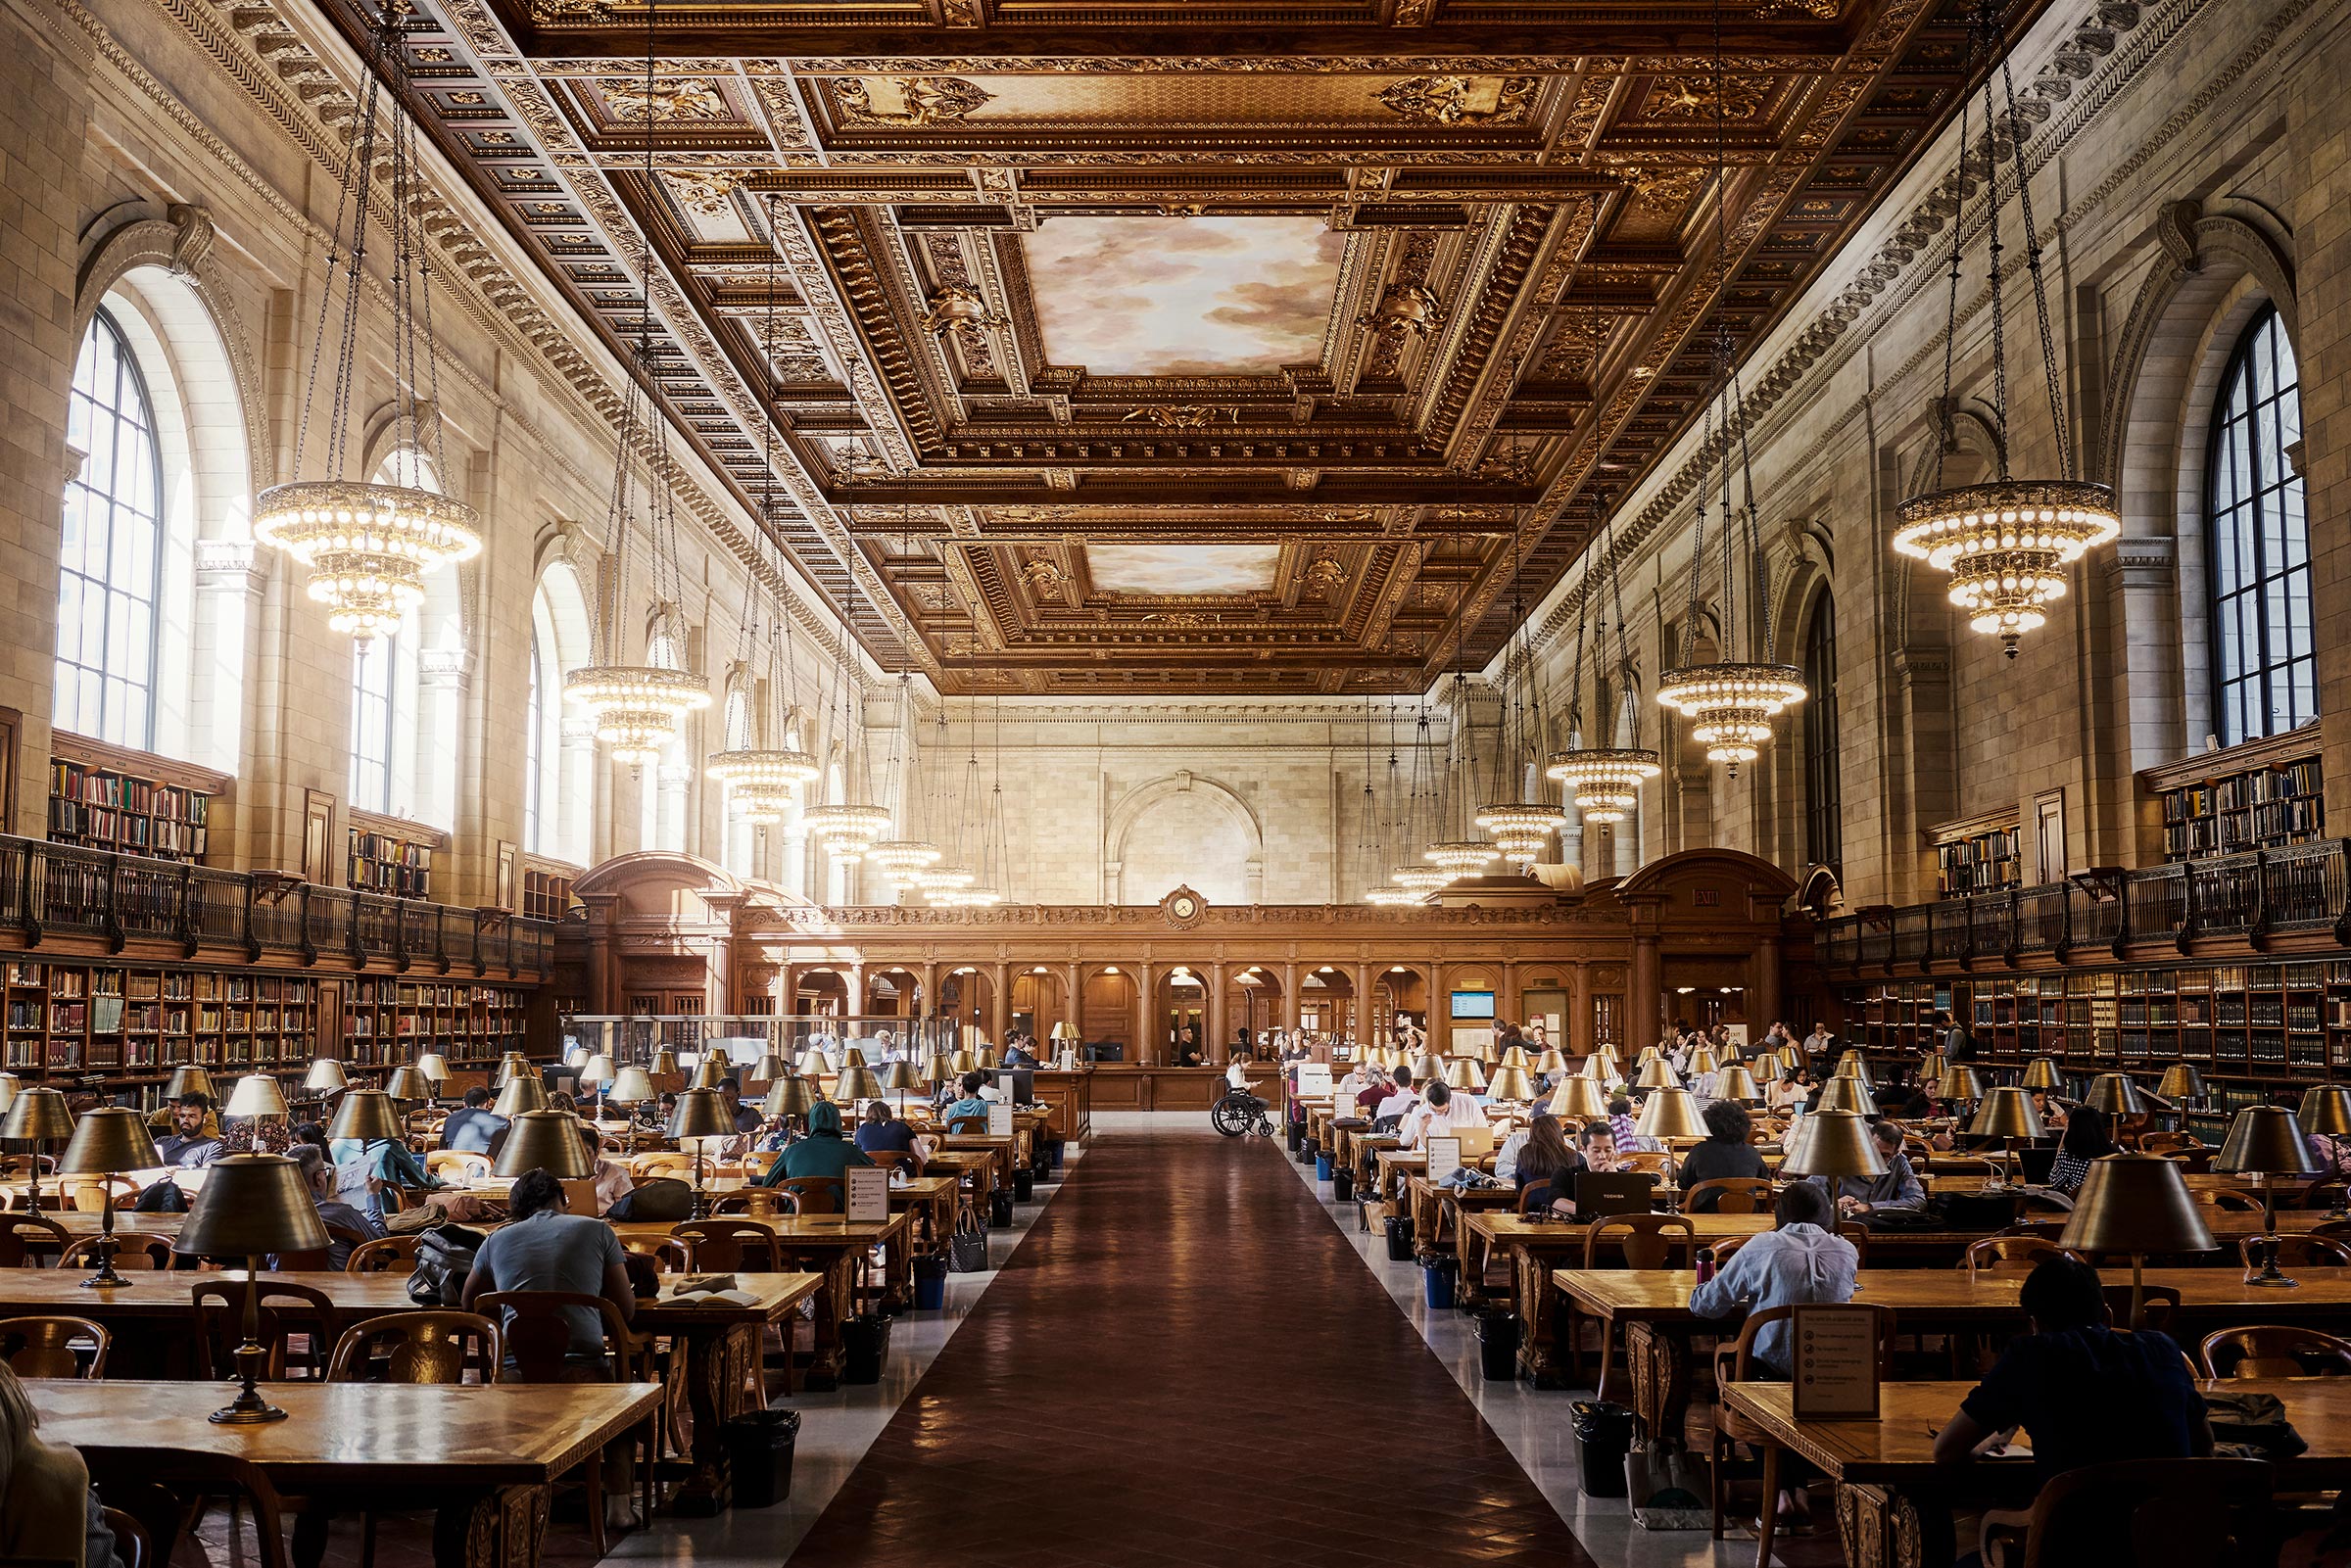 'Libraries provide and protect access to information and support and safeguard our right to read,' writes Tracie D. Hall. 'They are foundational to free, democratic societies.' (Dana Neibert—Getty Images)